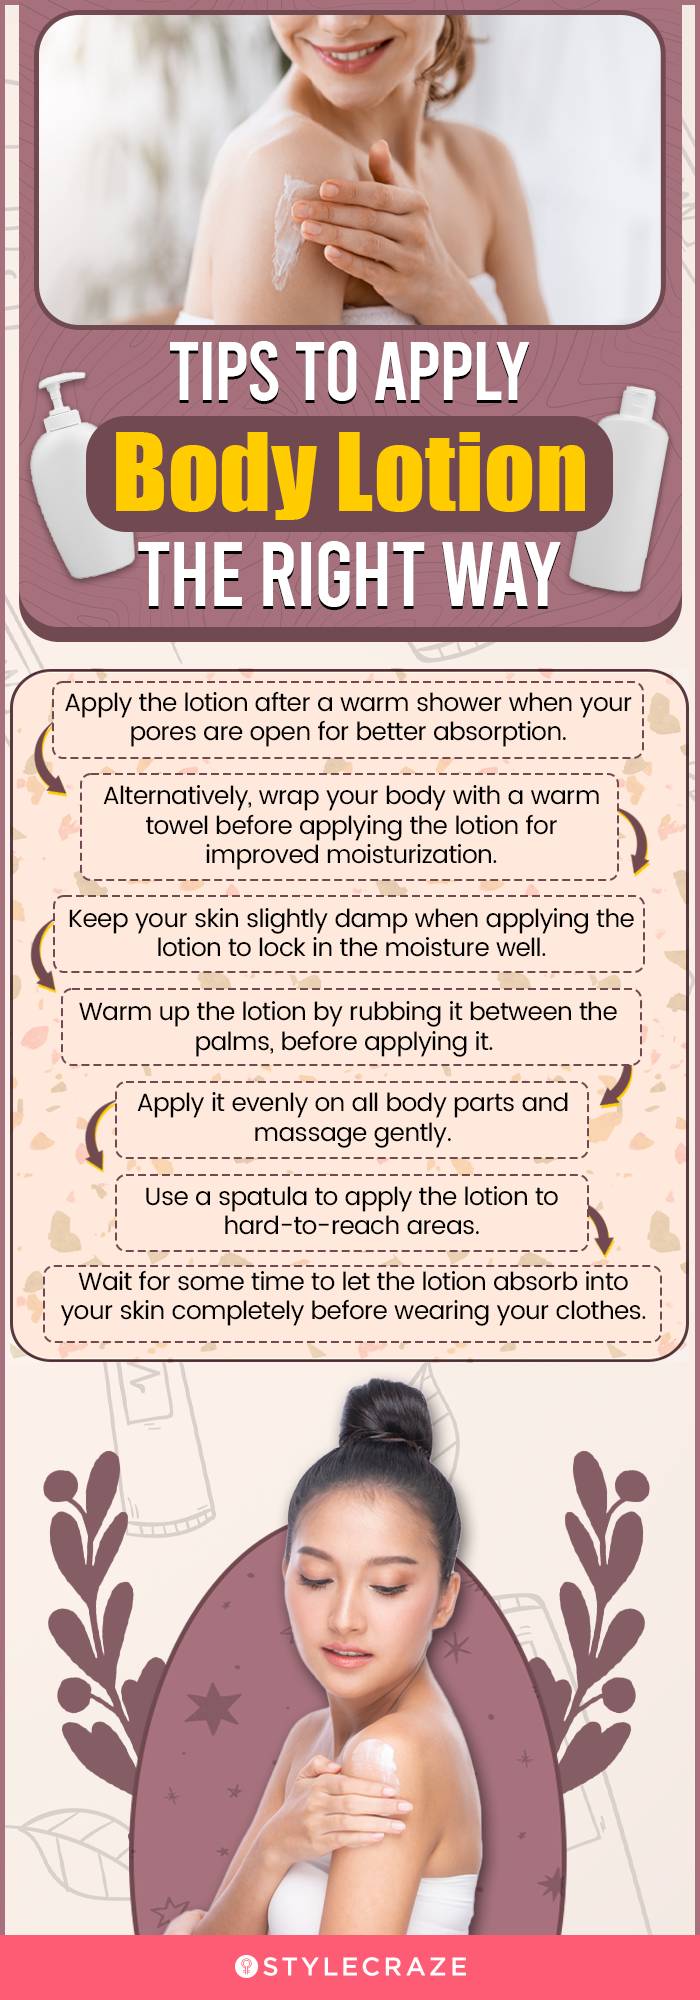 Tips To Apply Body Lotion The Right Way (infographic)